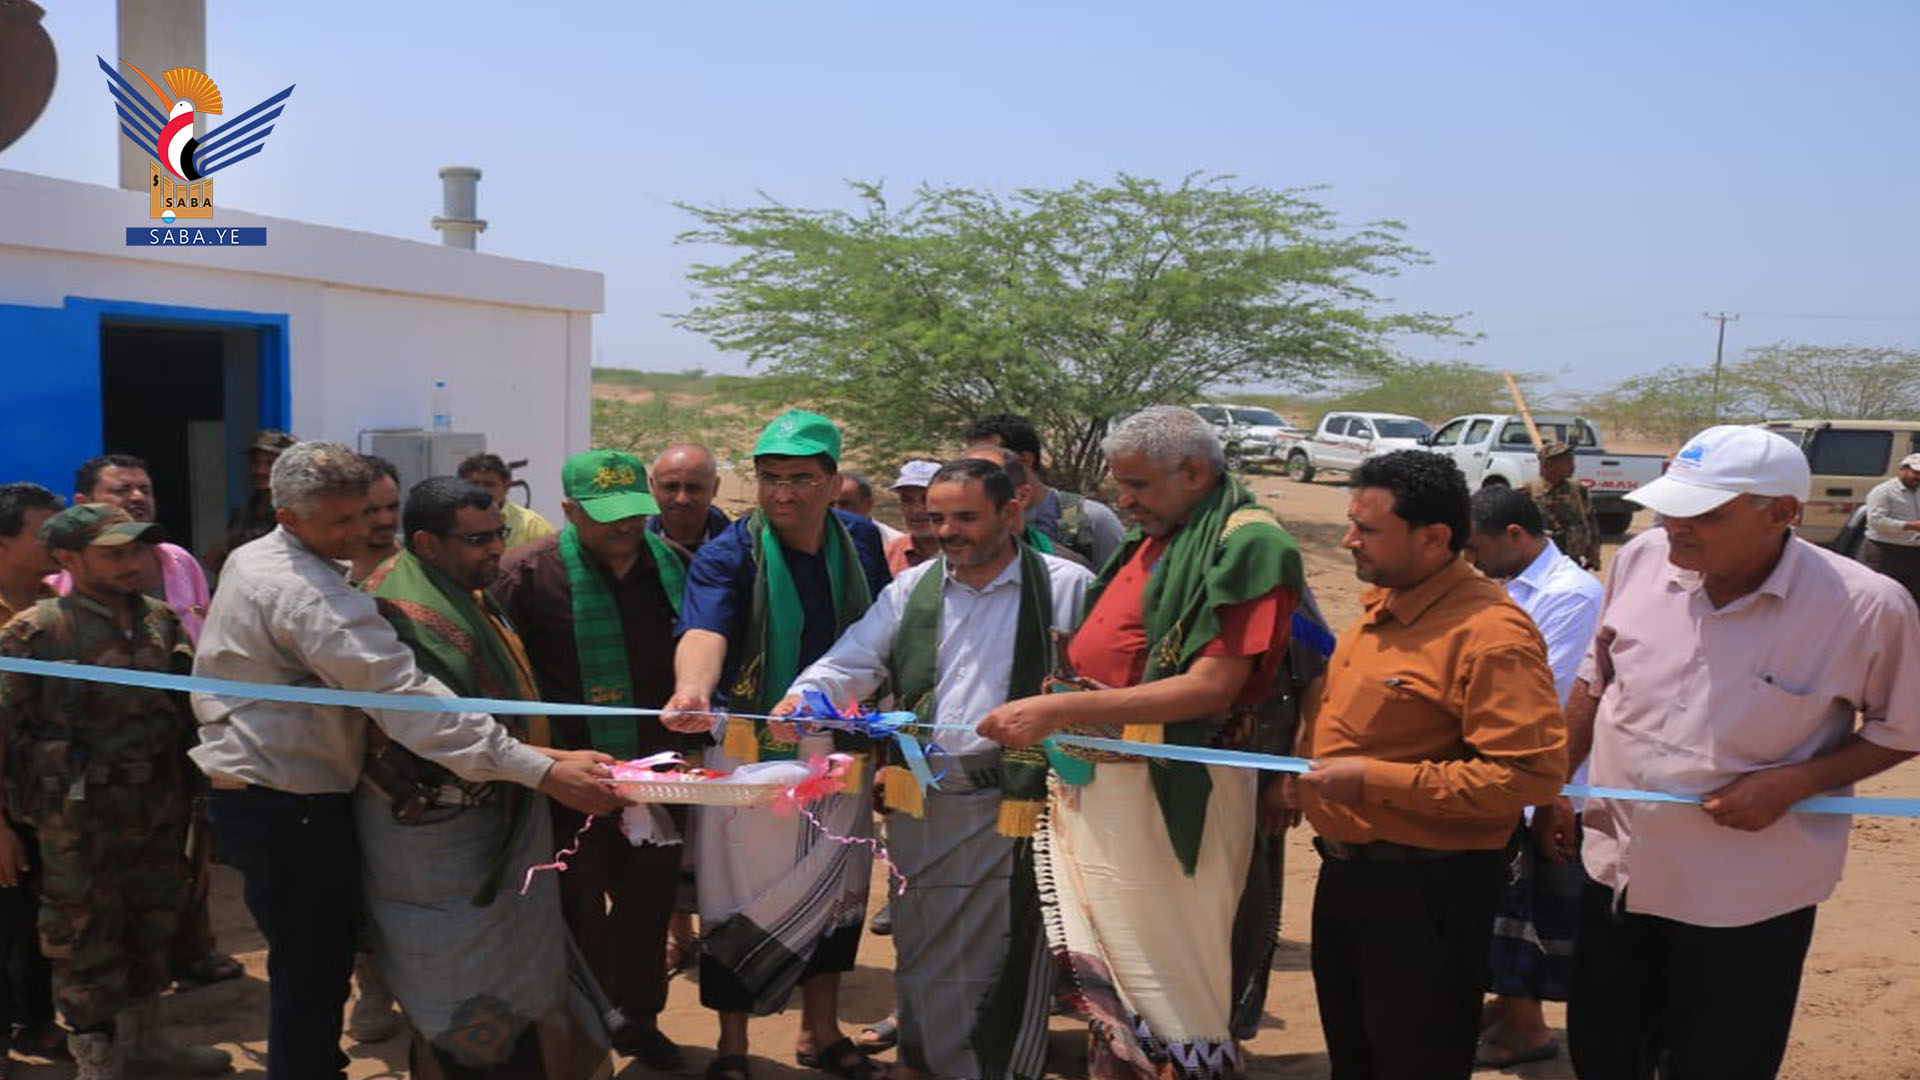 Deputy PM inaugurates solar energy system for pumping water in Hodeida